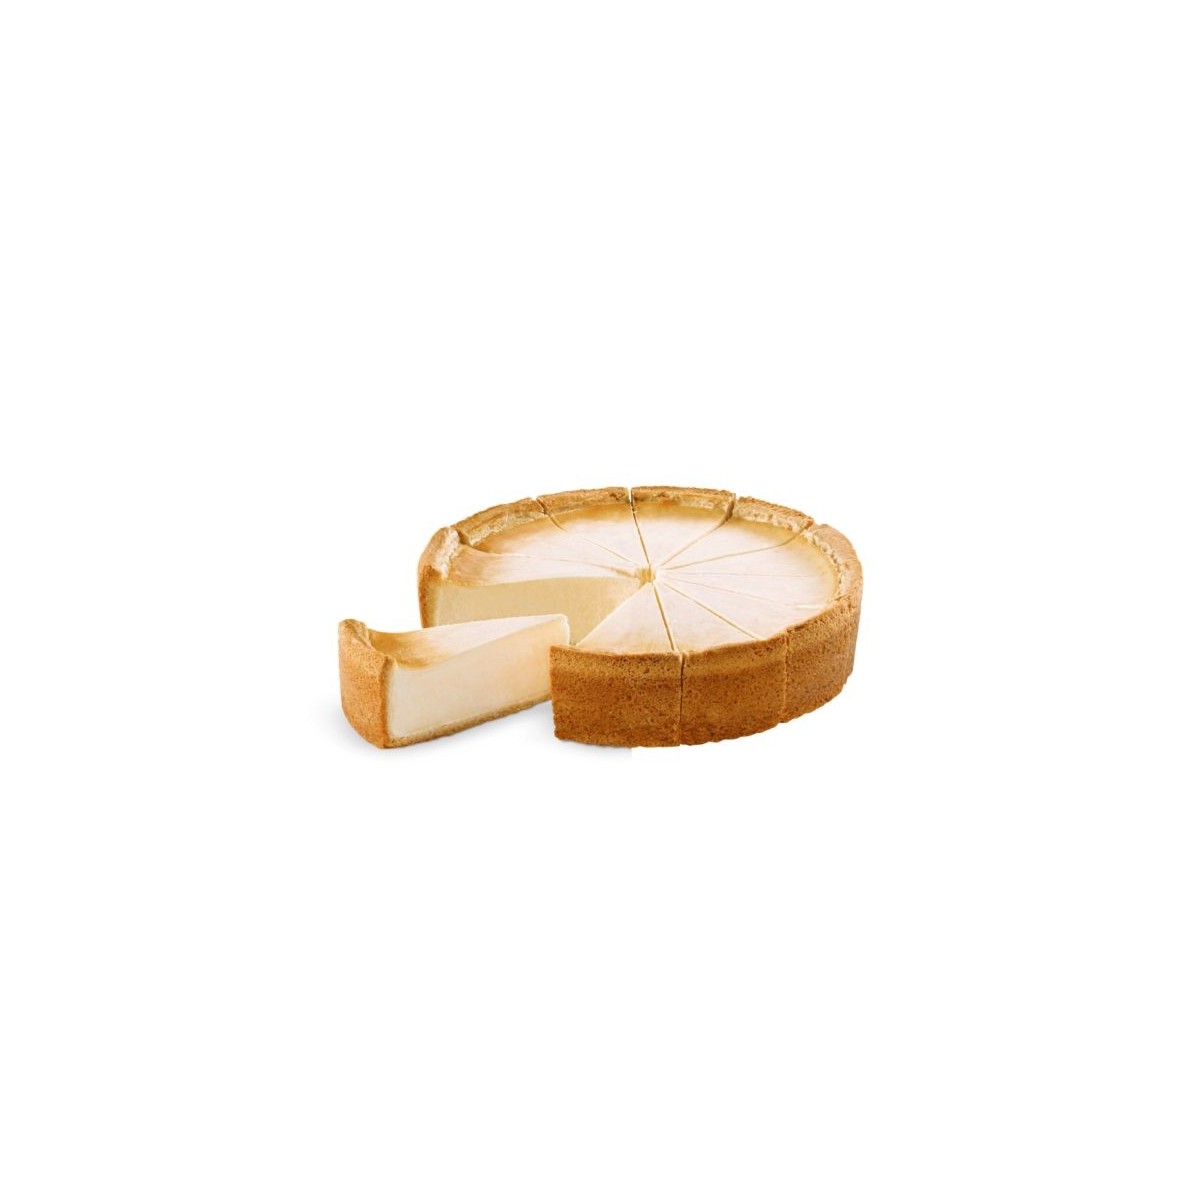 B & B 60067 TARTE AU FROMAGE CHEESECAKE PRECOUPE 12 PARTS CUIT 2.4KG